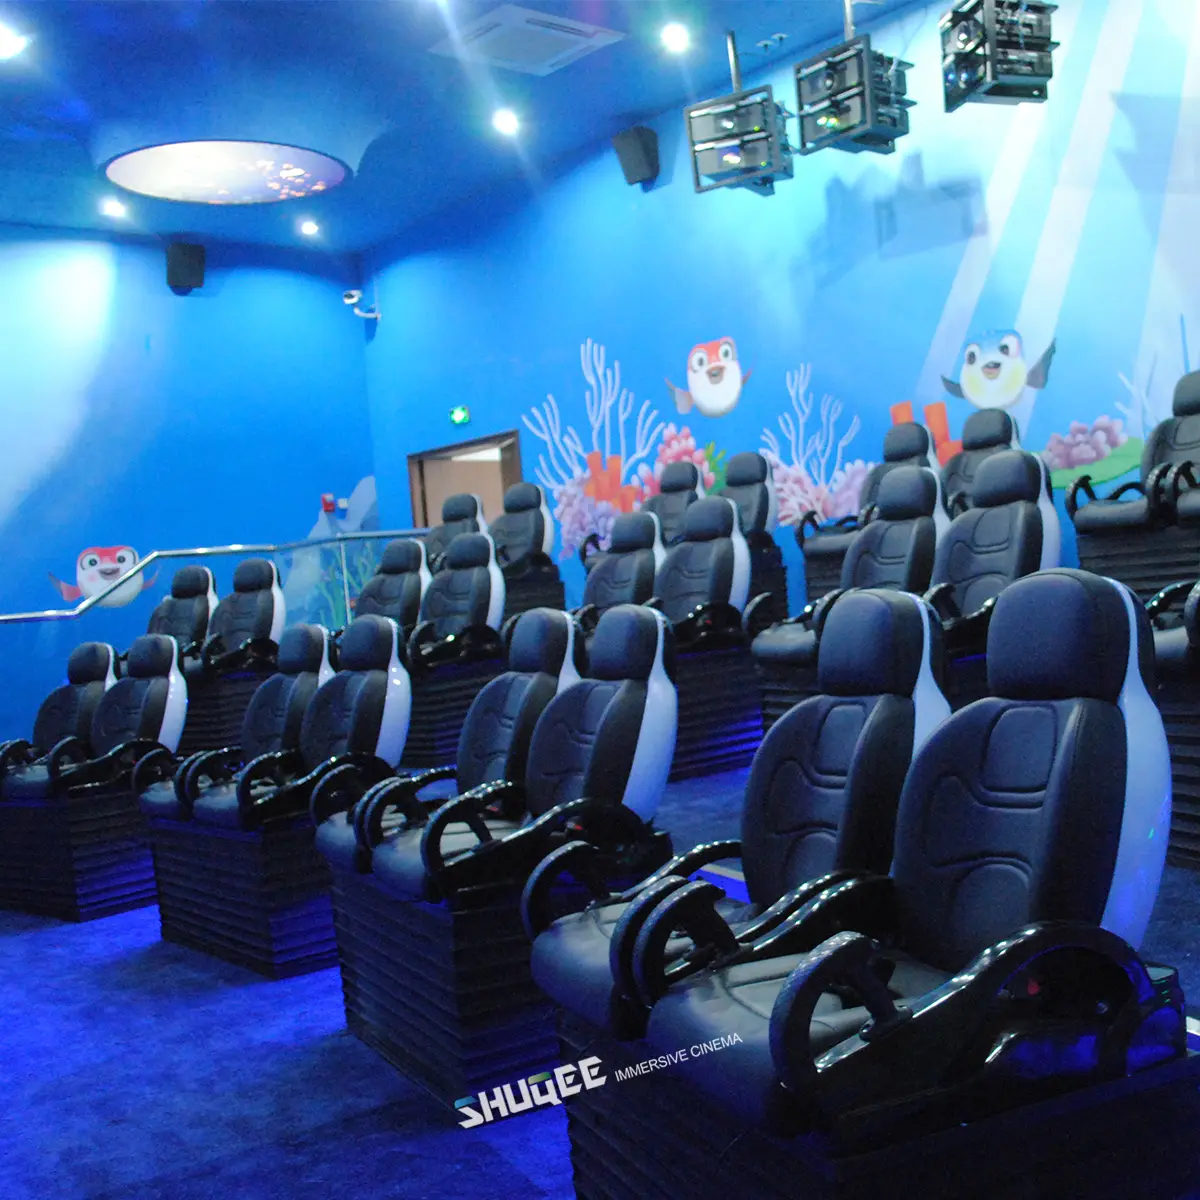 Environment Special Effects Simulator and Motion Seats Constitute An Immersive 4D Cinema